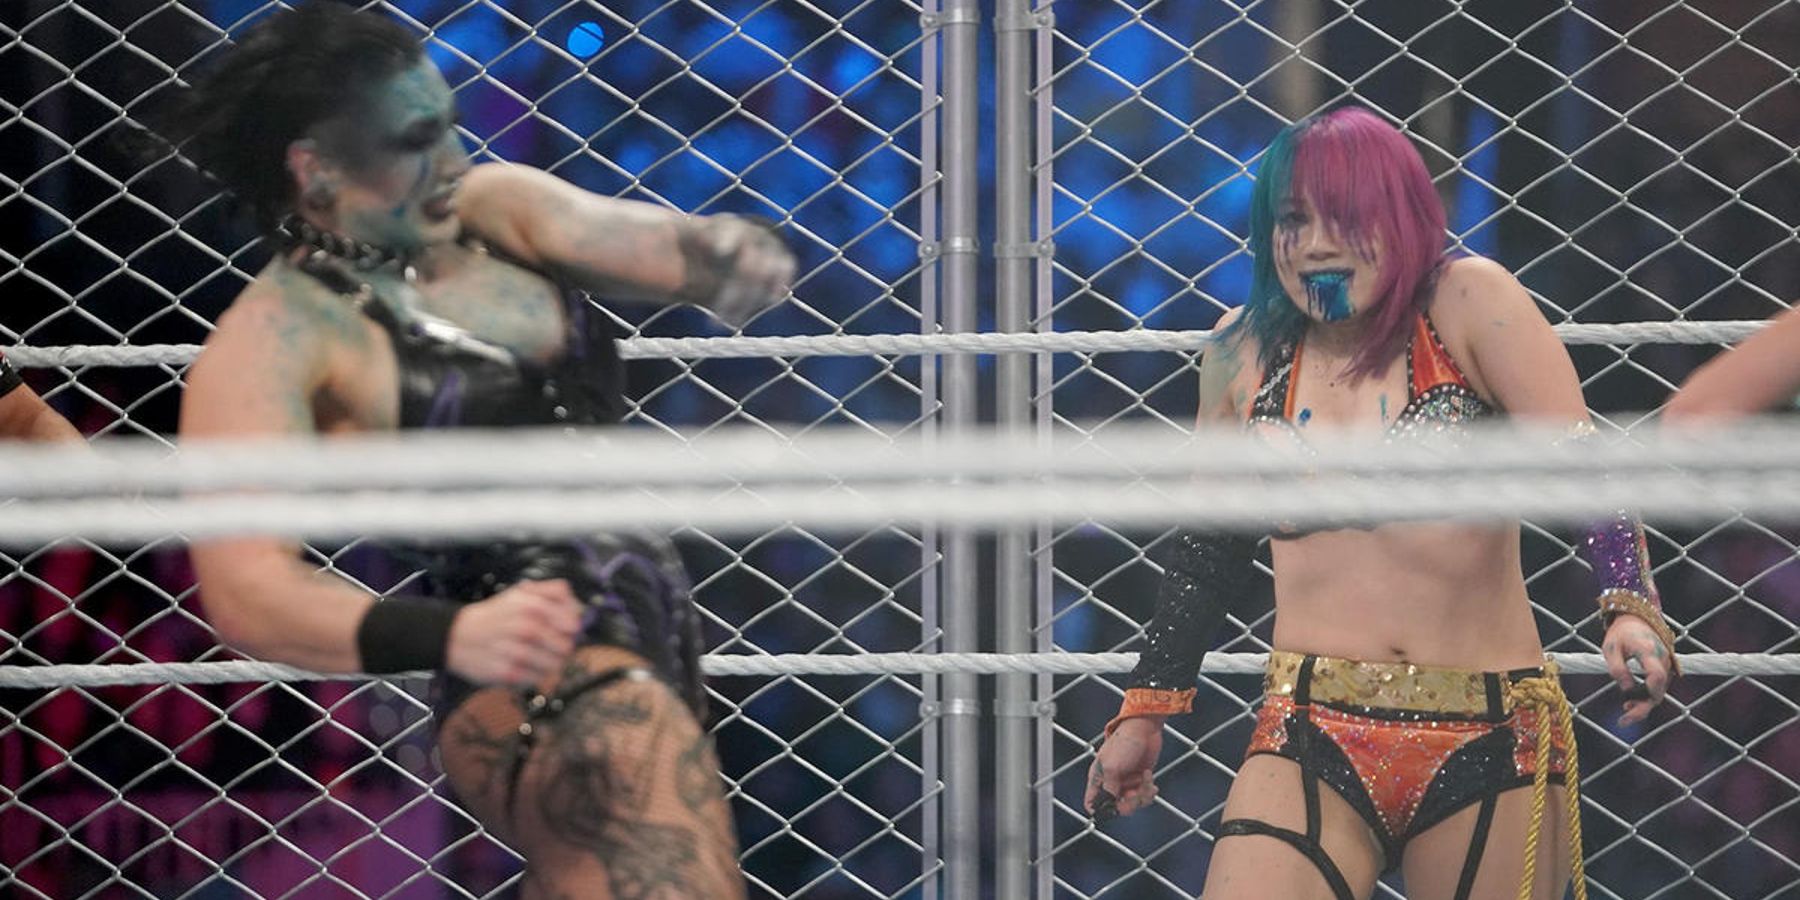 Asuka grins after hitting Rhea Ripley in the face with green mist during the women's WarGames match at WWE Survivor Series in 2022.